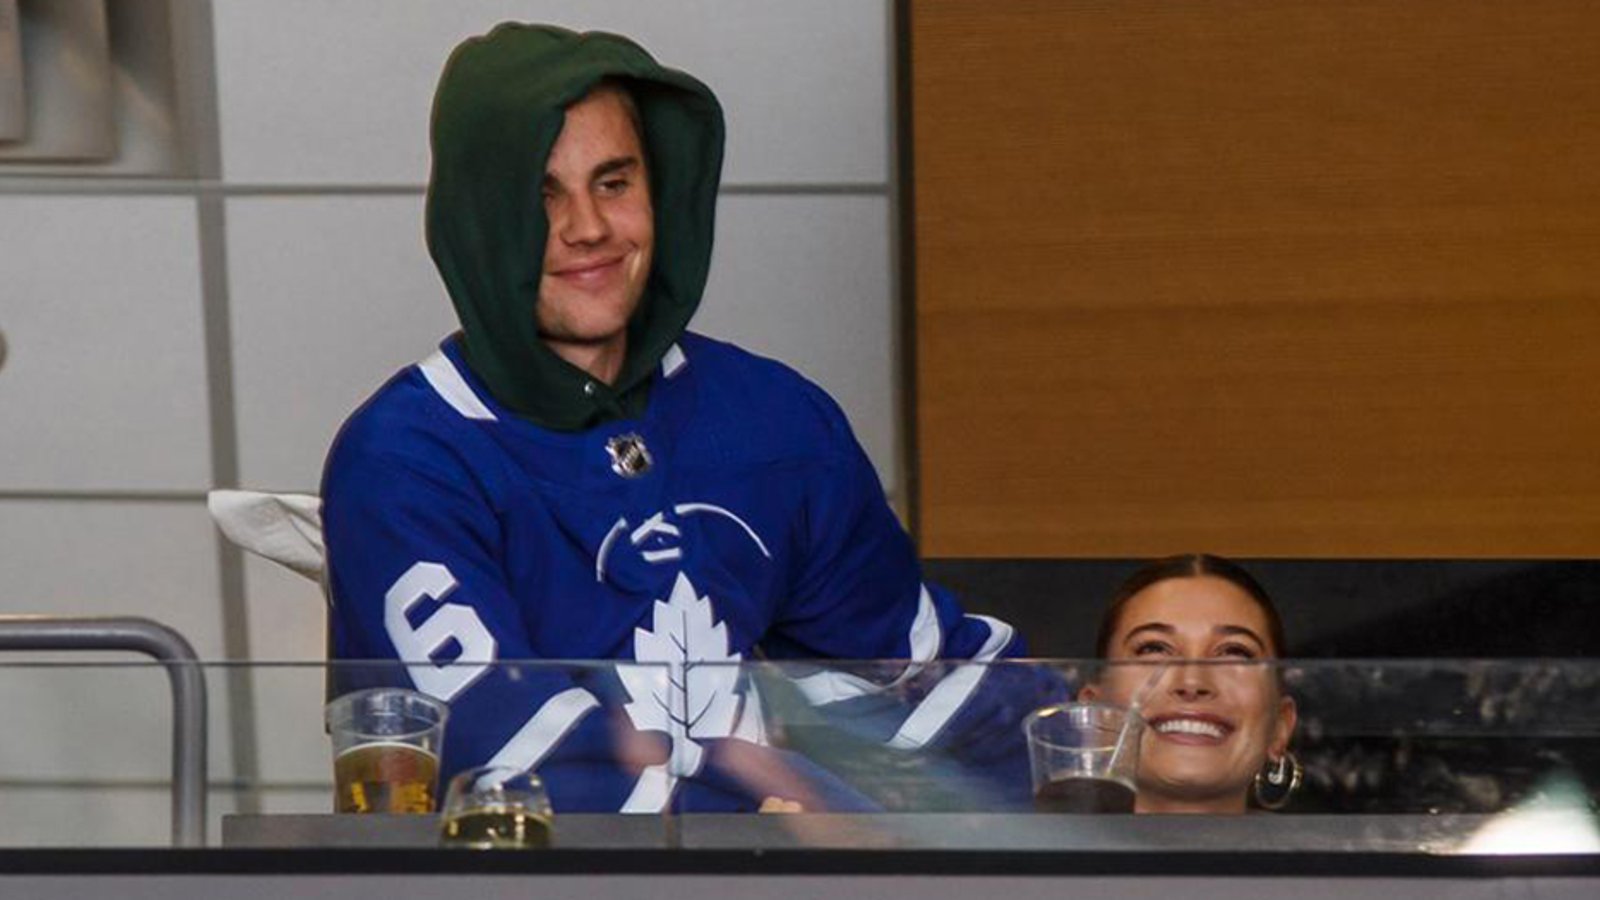 Auston Matthews wants Leafs to use Justin Bieber as goal song